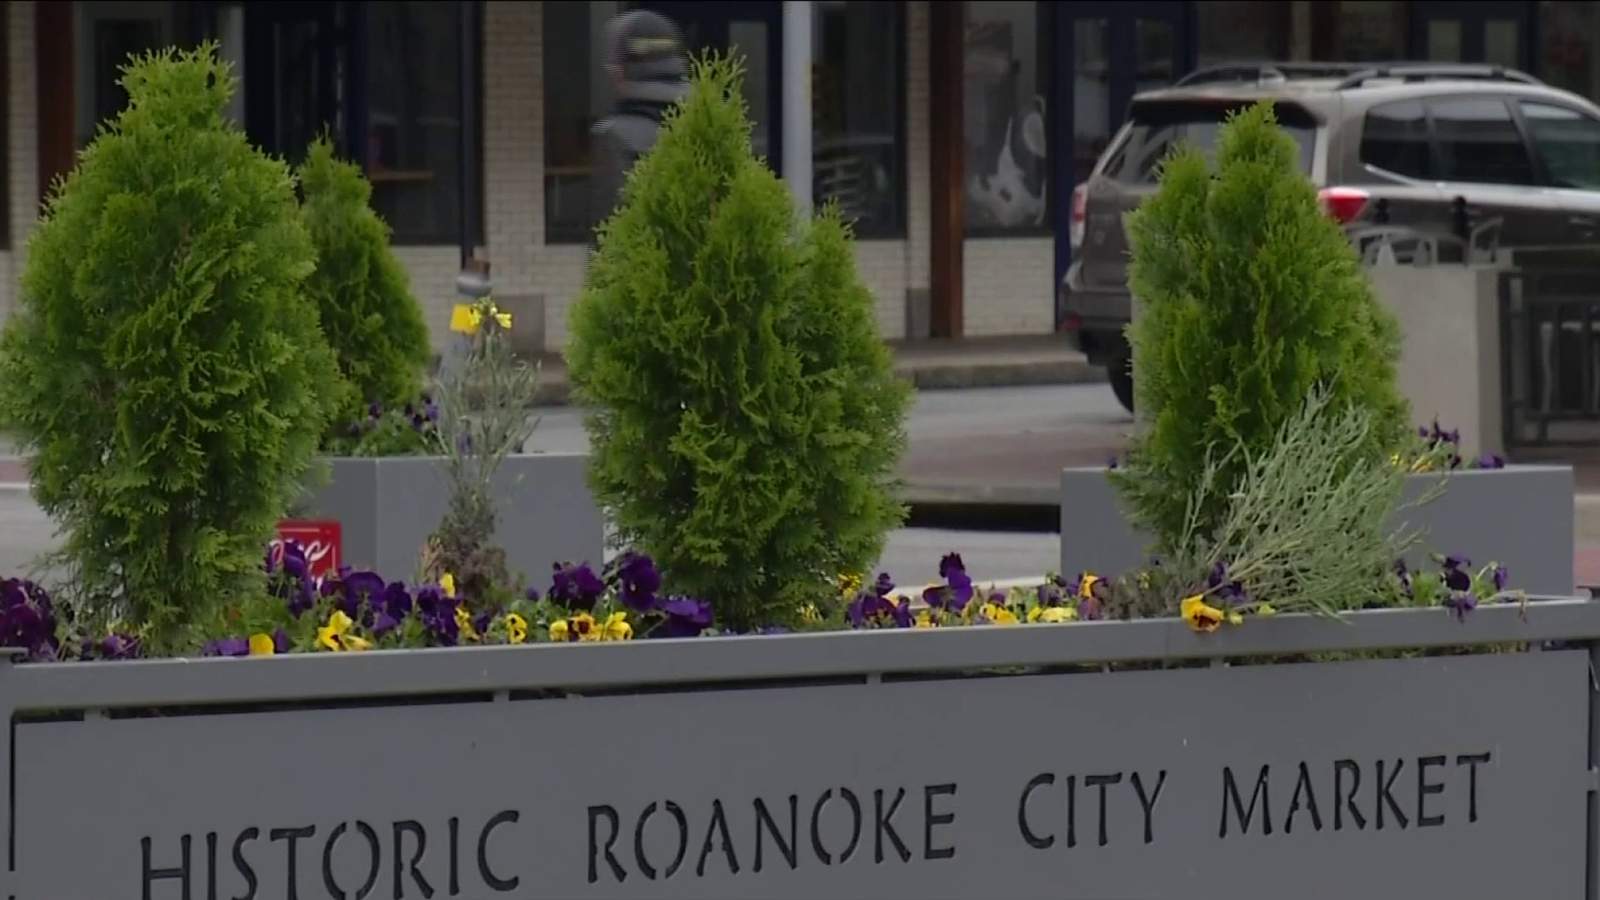 Need flowers? Downtown Roanoke is giving away flowers planted at City Market